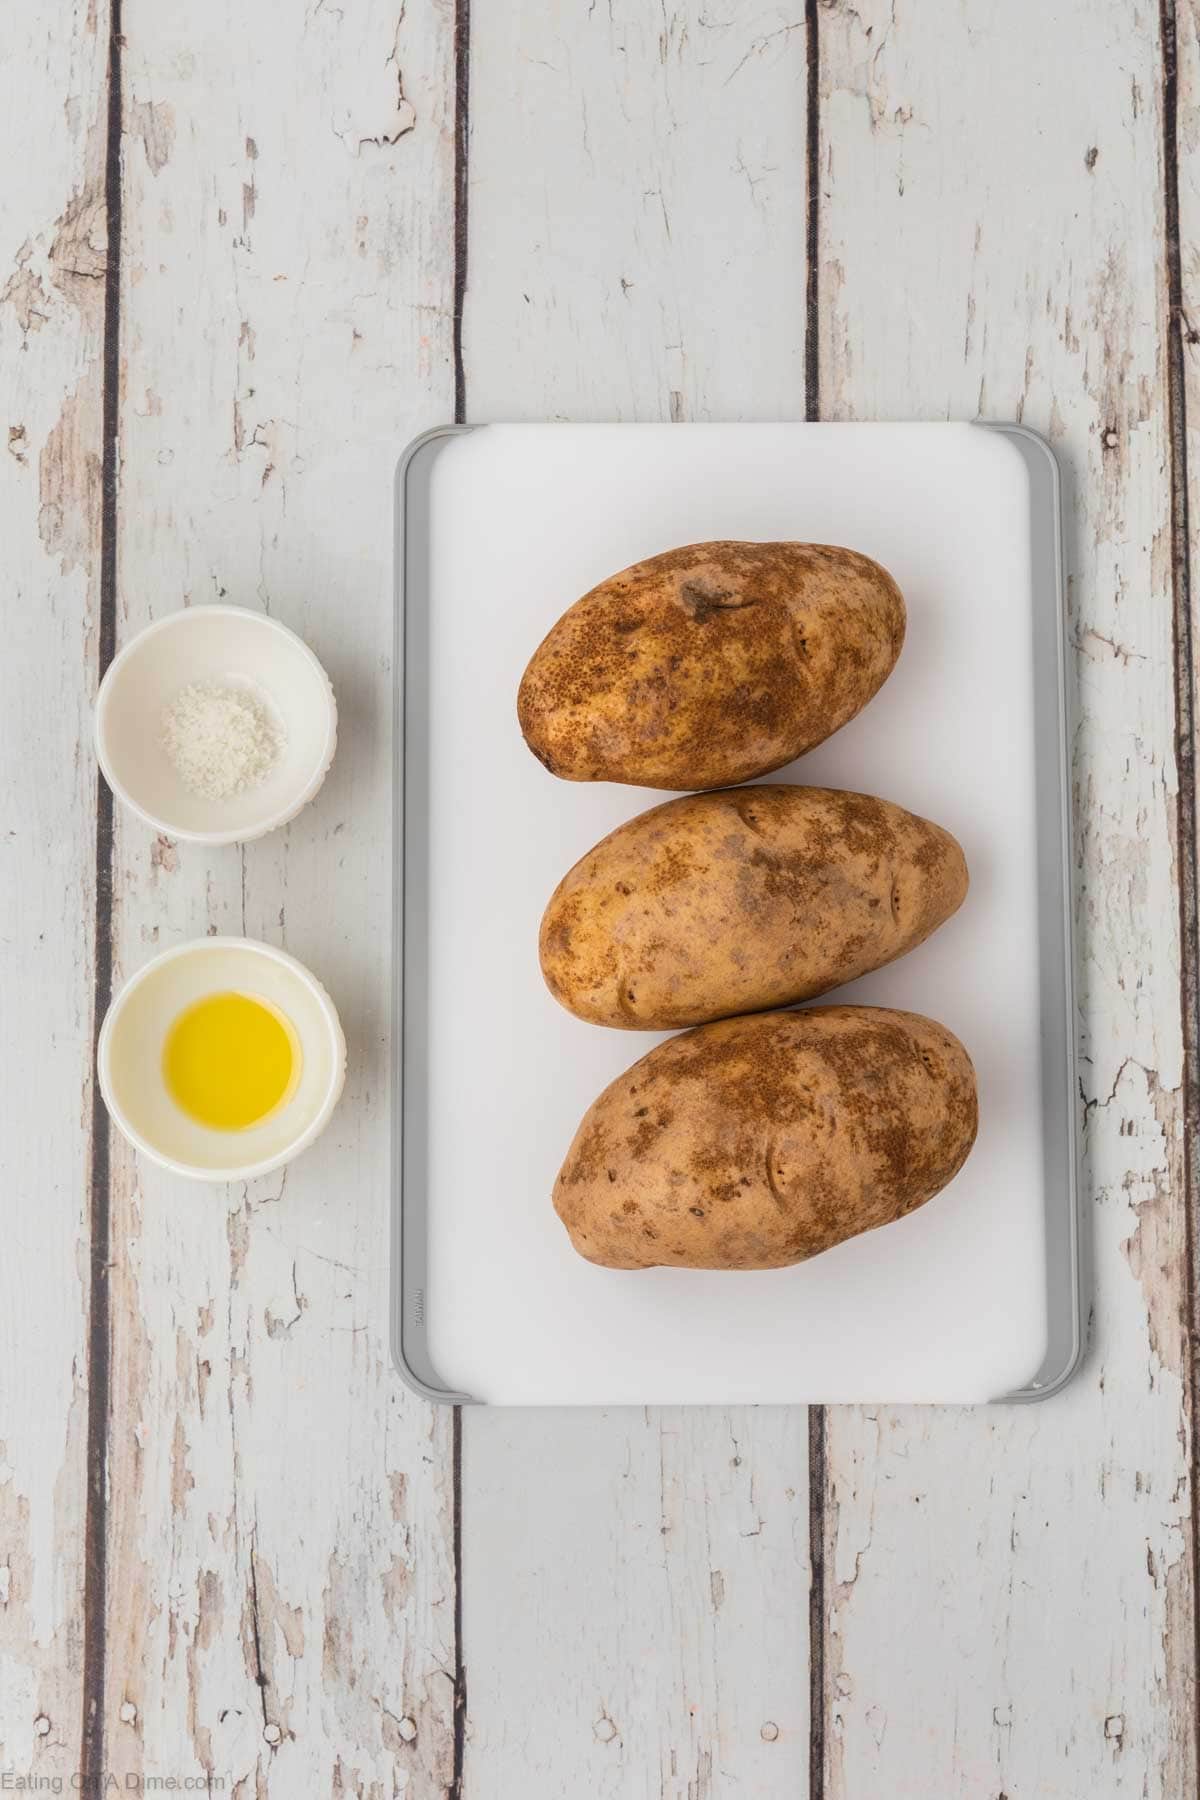 A white cutting board holds three whole russet potatoes placed in a row. On the left side of the cutting board are two small white bowls, one containing salt and the other olive oil—perfect ingredients for preparing air fryer baked potatoes—on a rustic white wooden surface.